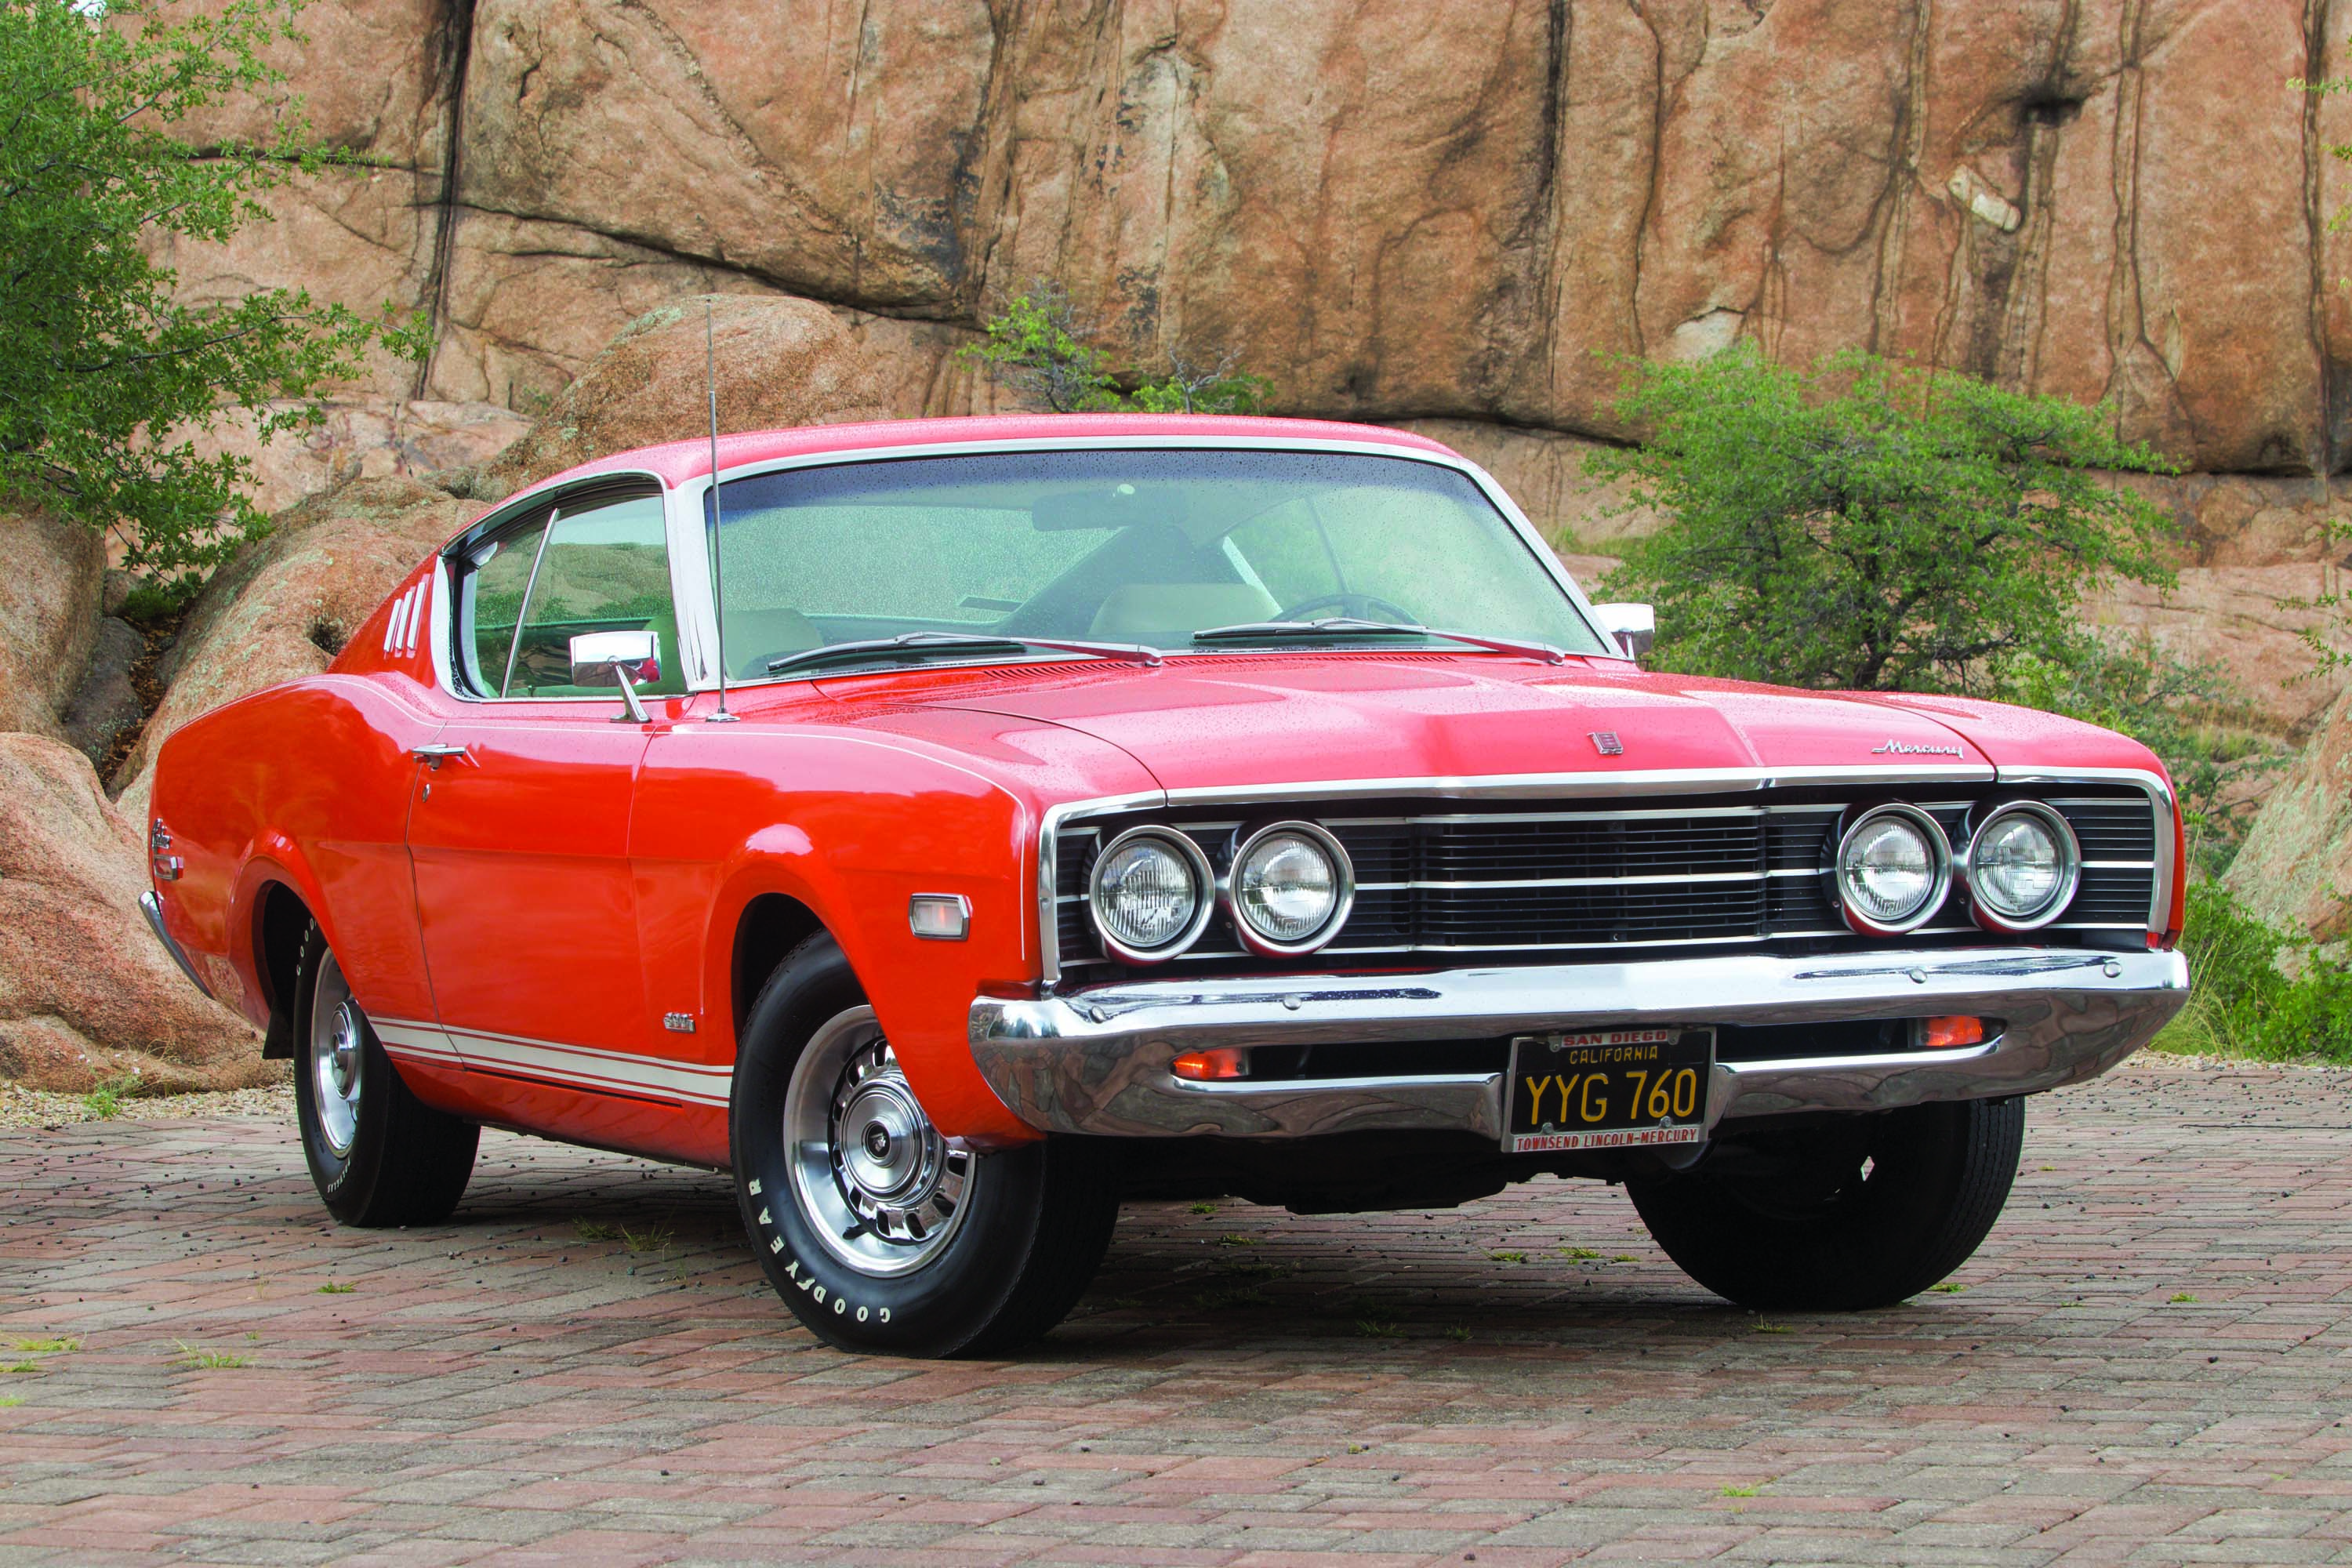 This 1968 Mercury Cyclone Remains Unrestored